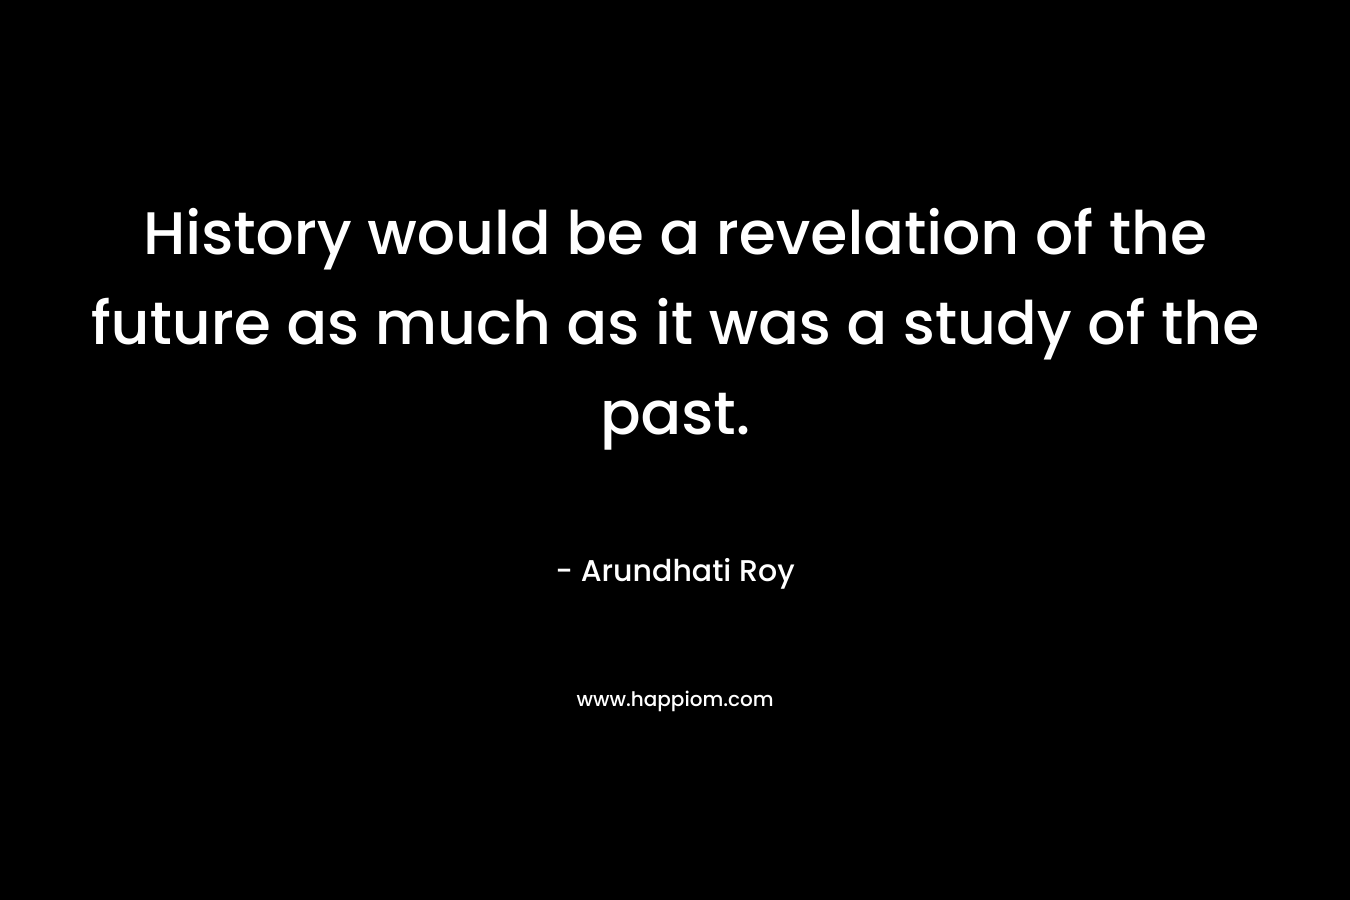 History would be a revelation of the future as much as it was a study of the past.